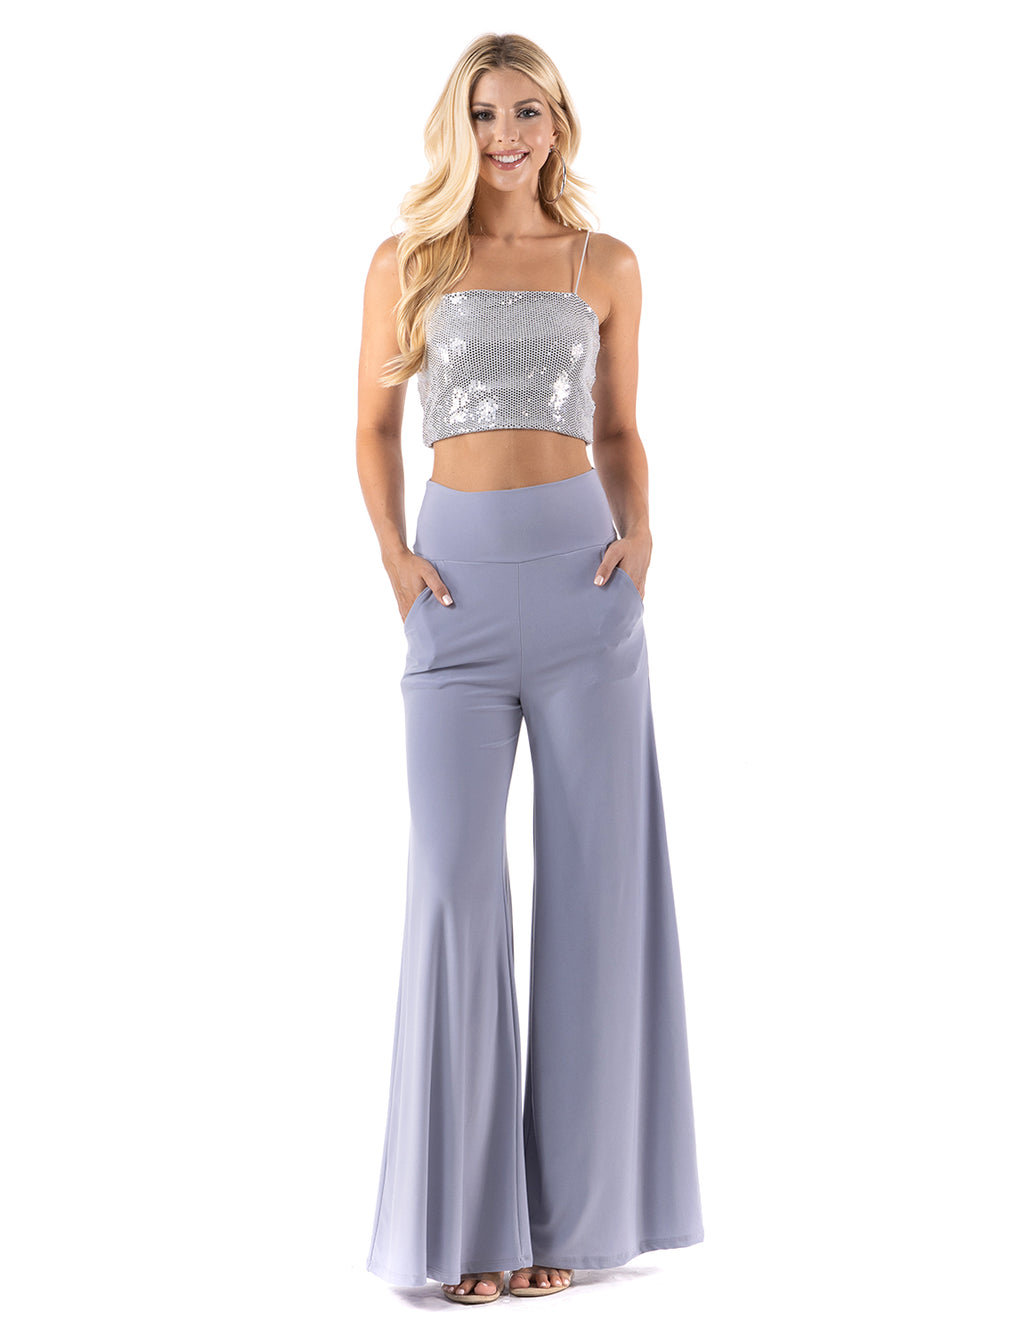 Beautiful woman wearing this amazing Lilac High waist palazzo pants featuring pockets, wide legs, and a comfortable stretchy fabric